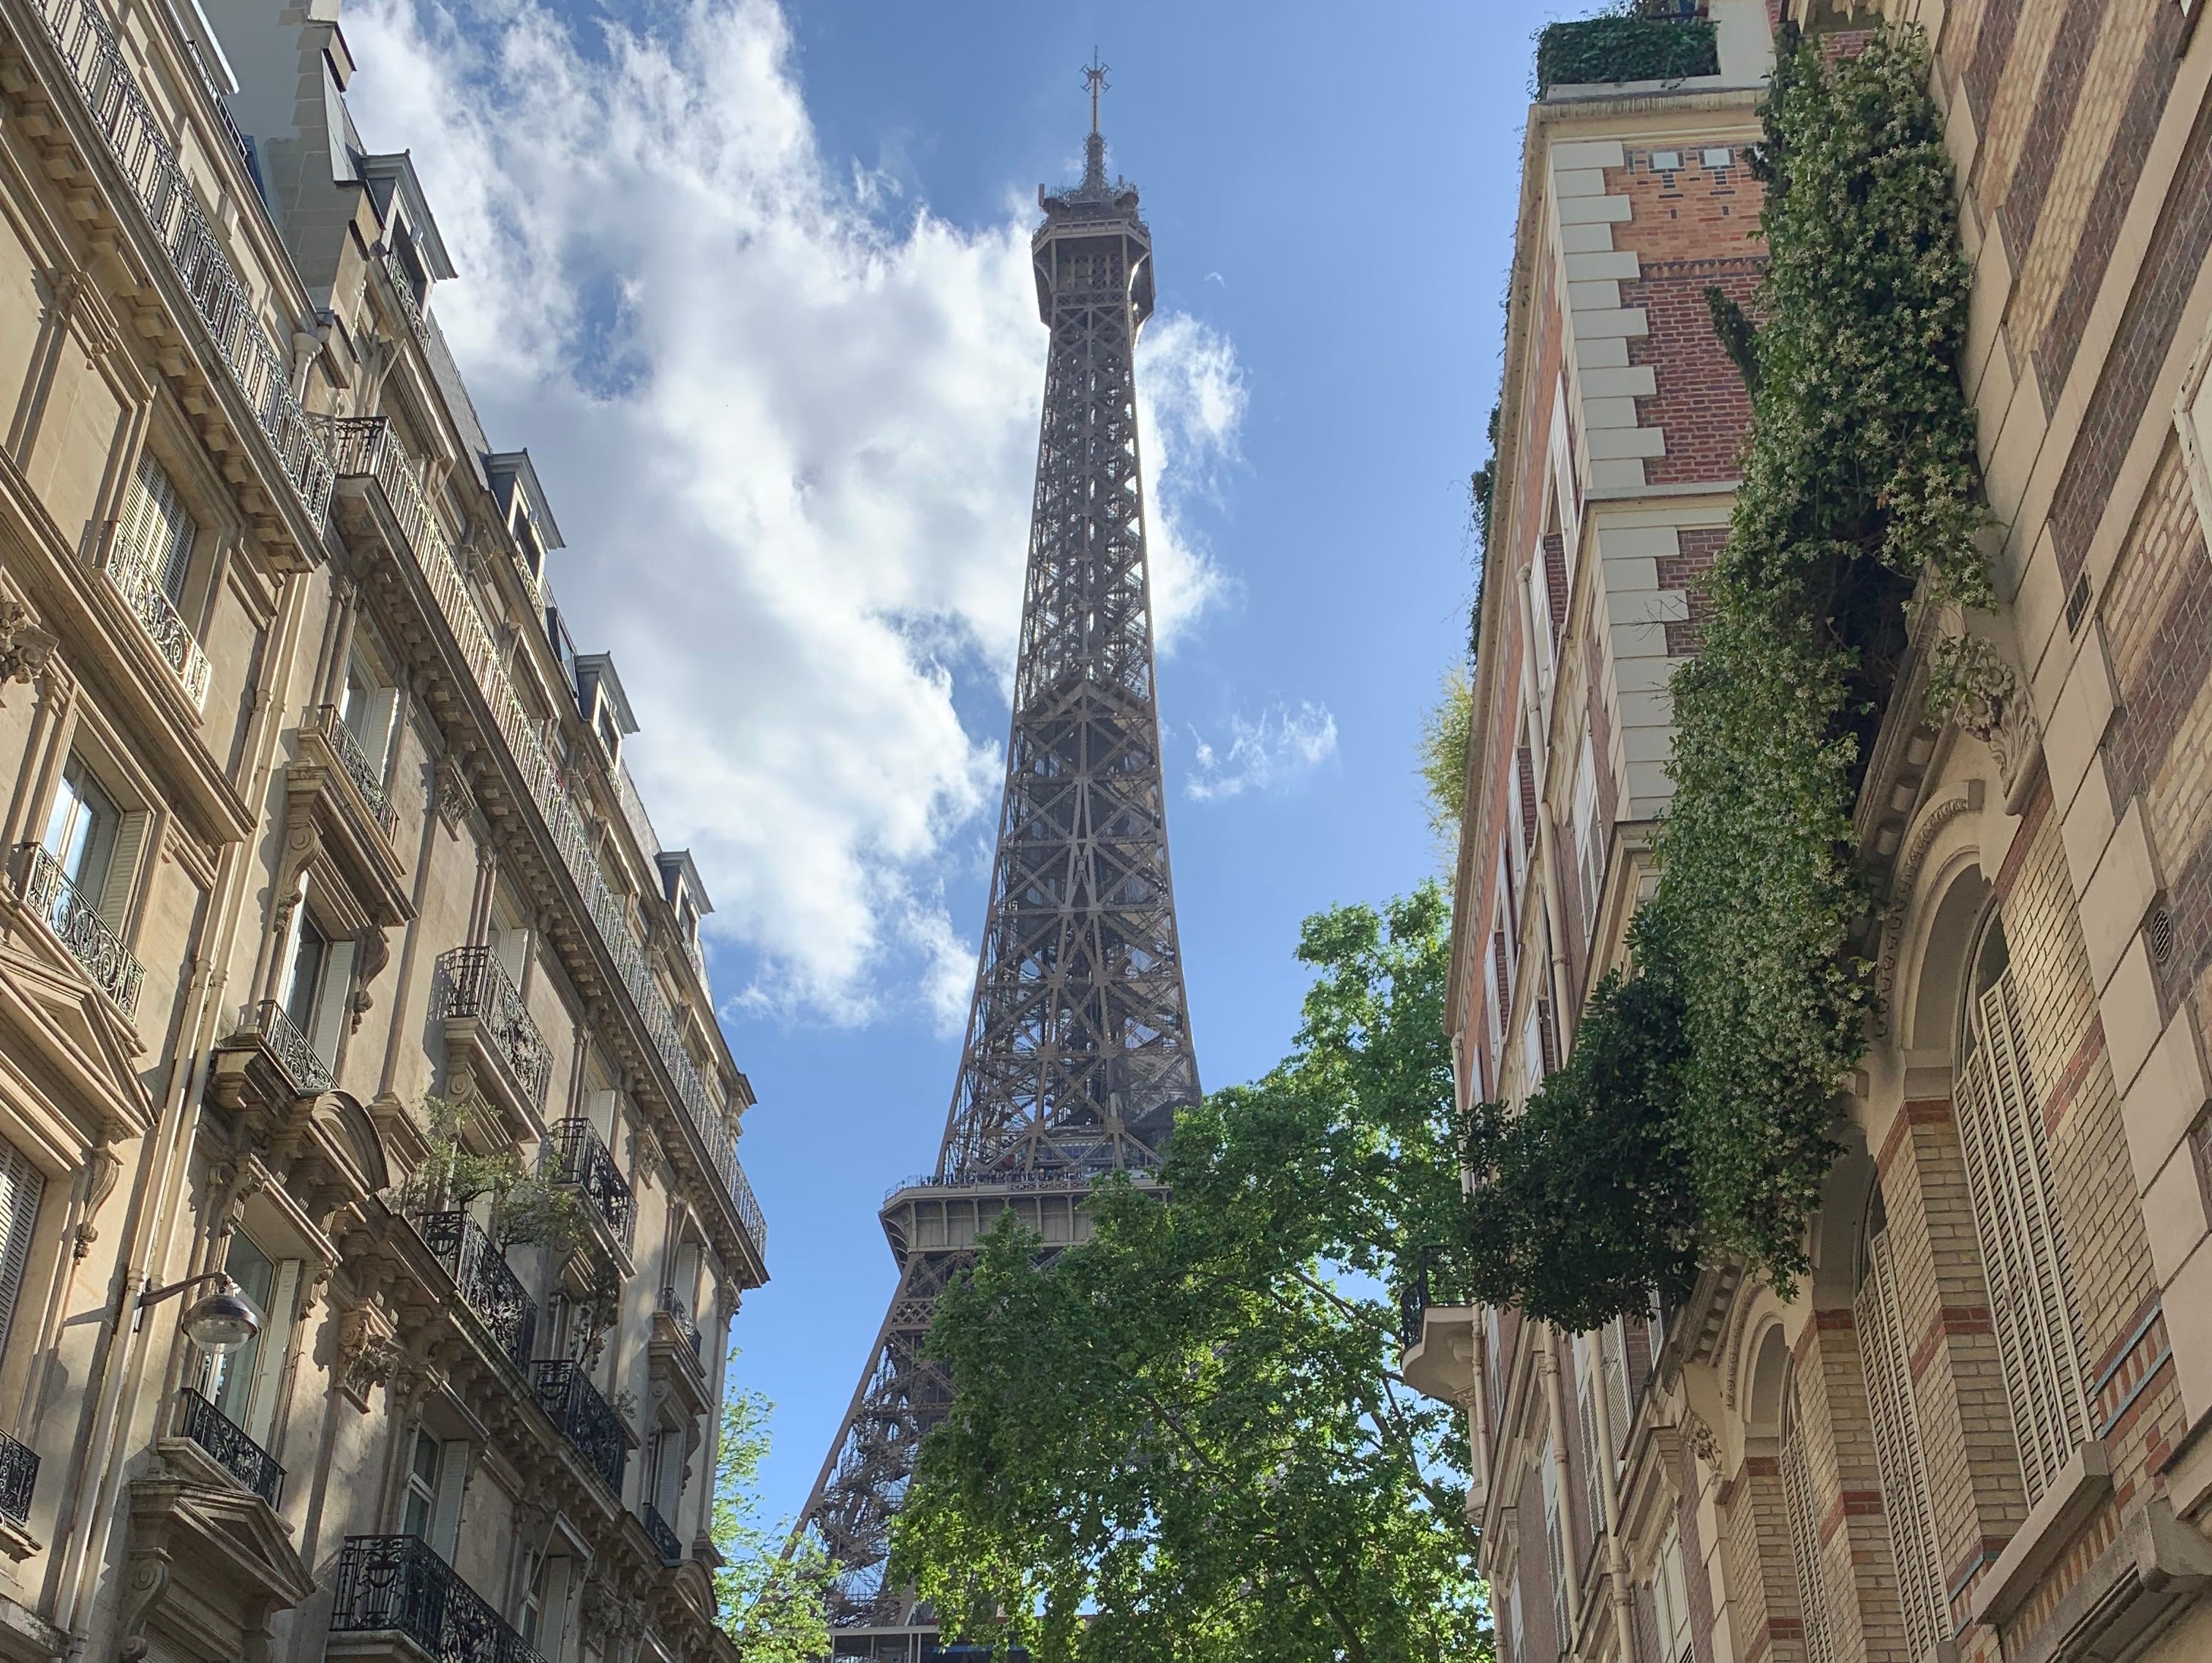 <p>When I first visited <a href="https://www.insider.com/le-royal-monceau-raffles-paris-palace-luxury-hotel-review-2023-7">Paris</a> last summer, I, like many travelers, knew I would need to see the Eiffel Tower.</p><p>Unconvinced that the view from the top would really be that remarkable, I had no real interest in paying to go to the top. Instead, I packed a light dinner from a local grocery store and took it to a free park facing the monument.</p><p>The surrounding area was flush with other tourists and vendors selling little trinkets or water bottles, but the space was big enough to spread out and didn't feel too crowded. </p><p>I was happy to sit on the grass, eat dinner, and people-watch, and I would do it again the next time I visit. </p>